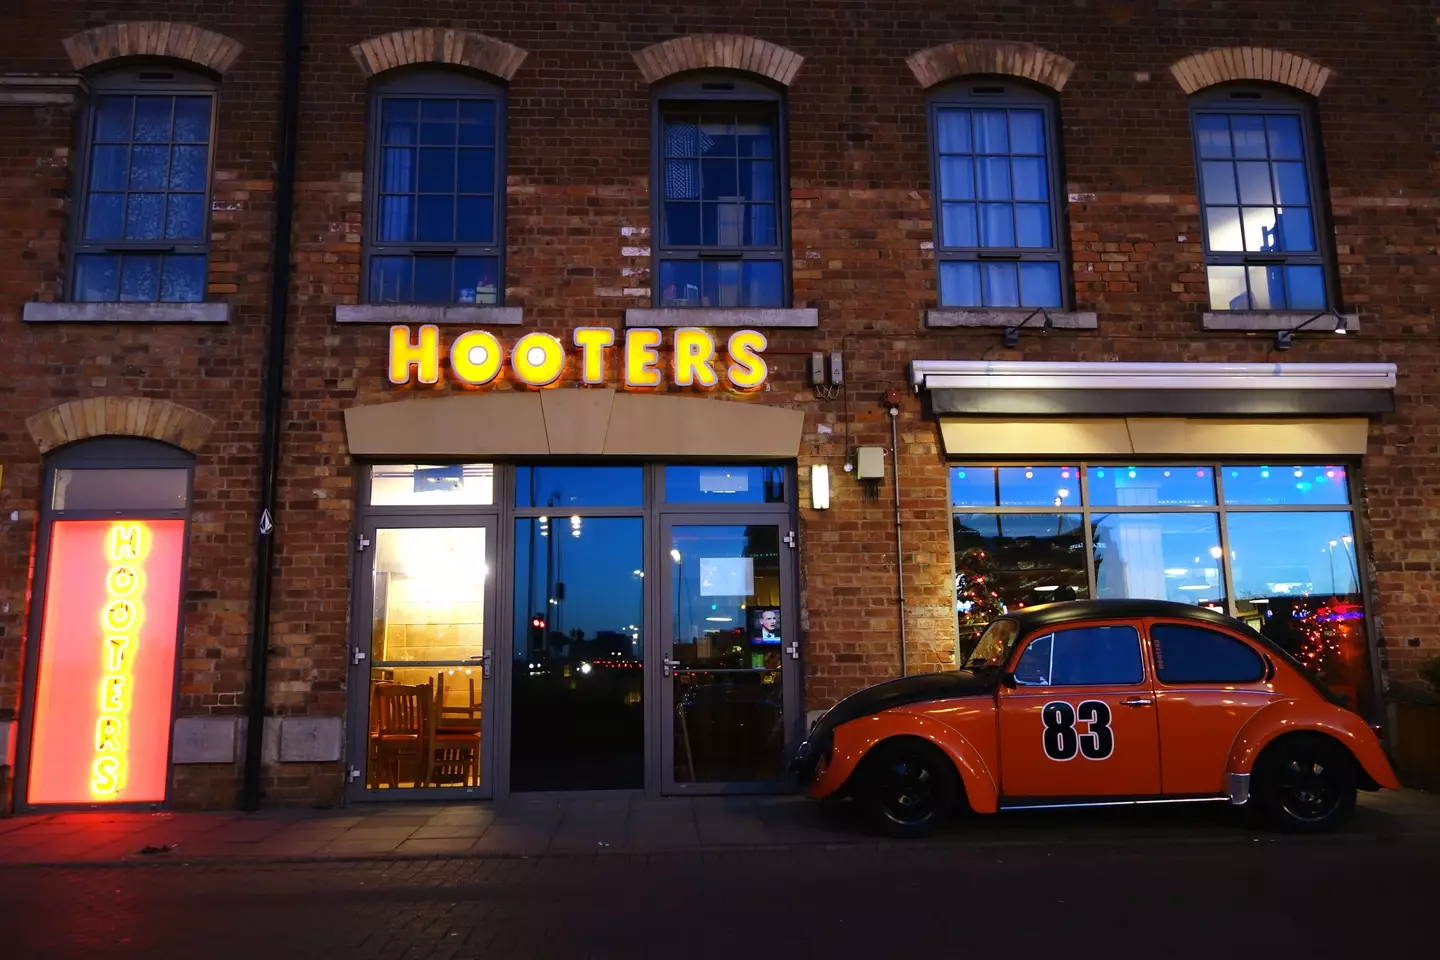 Hooters has expanded into the UK with branches in Nottingham and Liverpool.